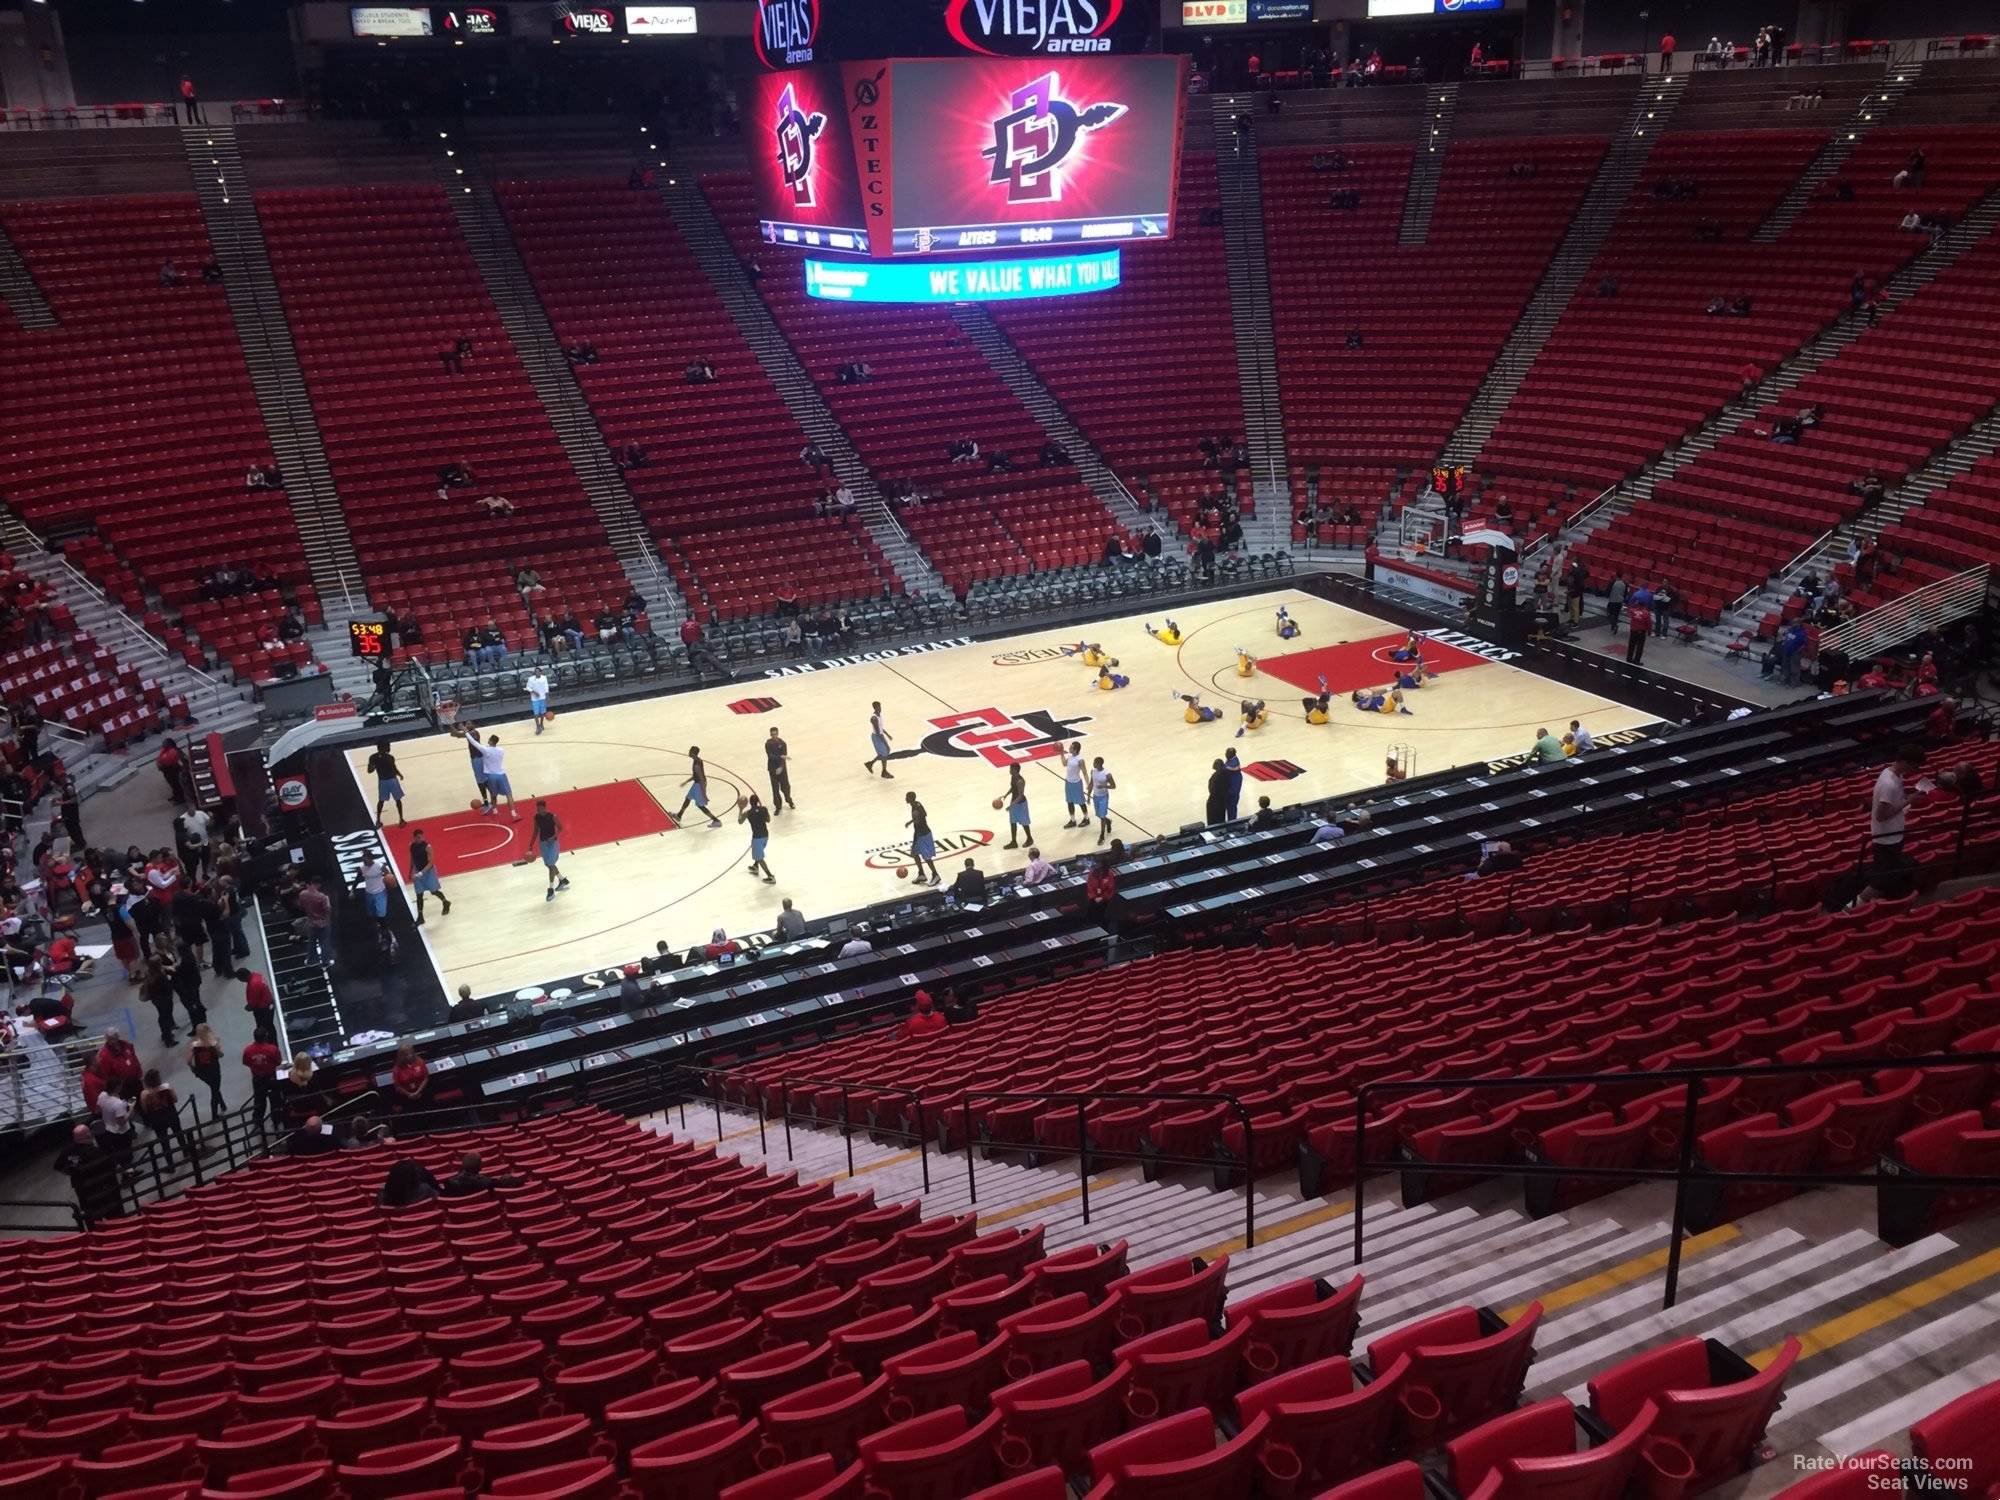 section p, row 30 seat view  - viejas arena